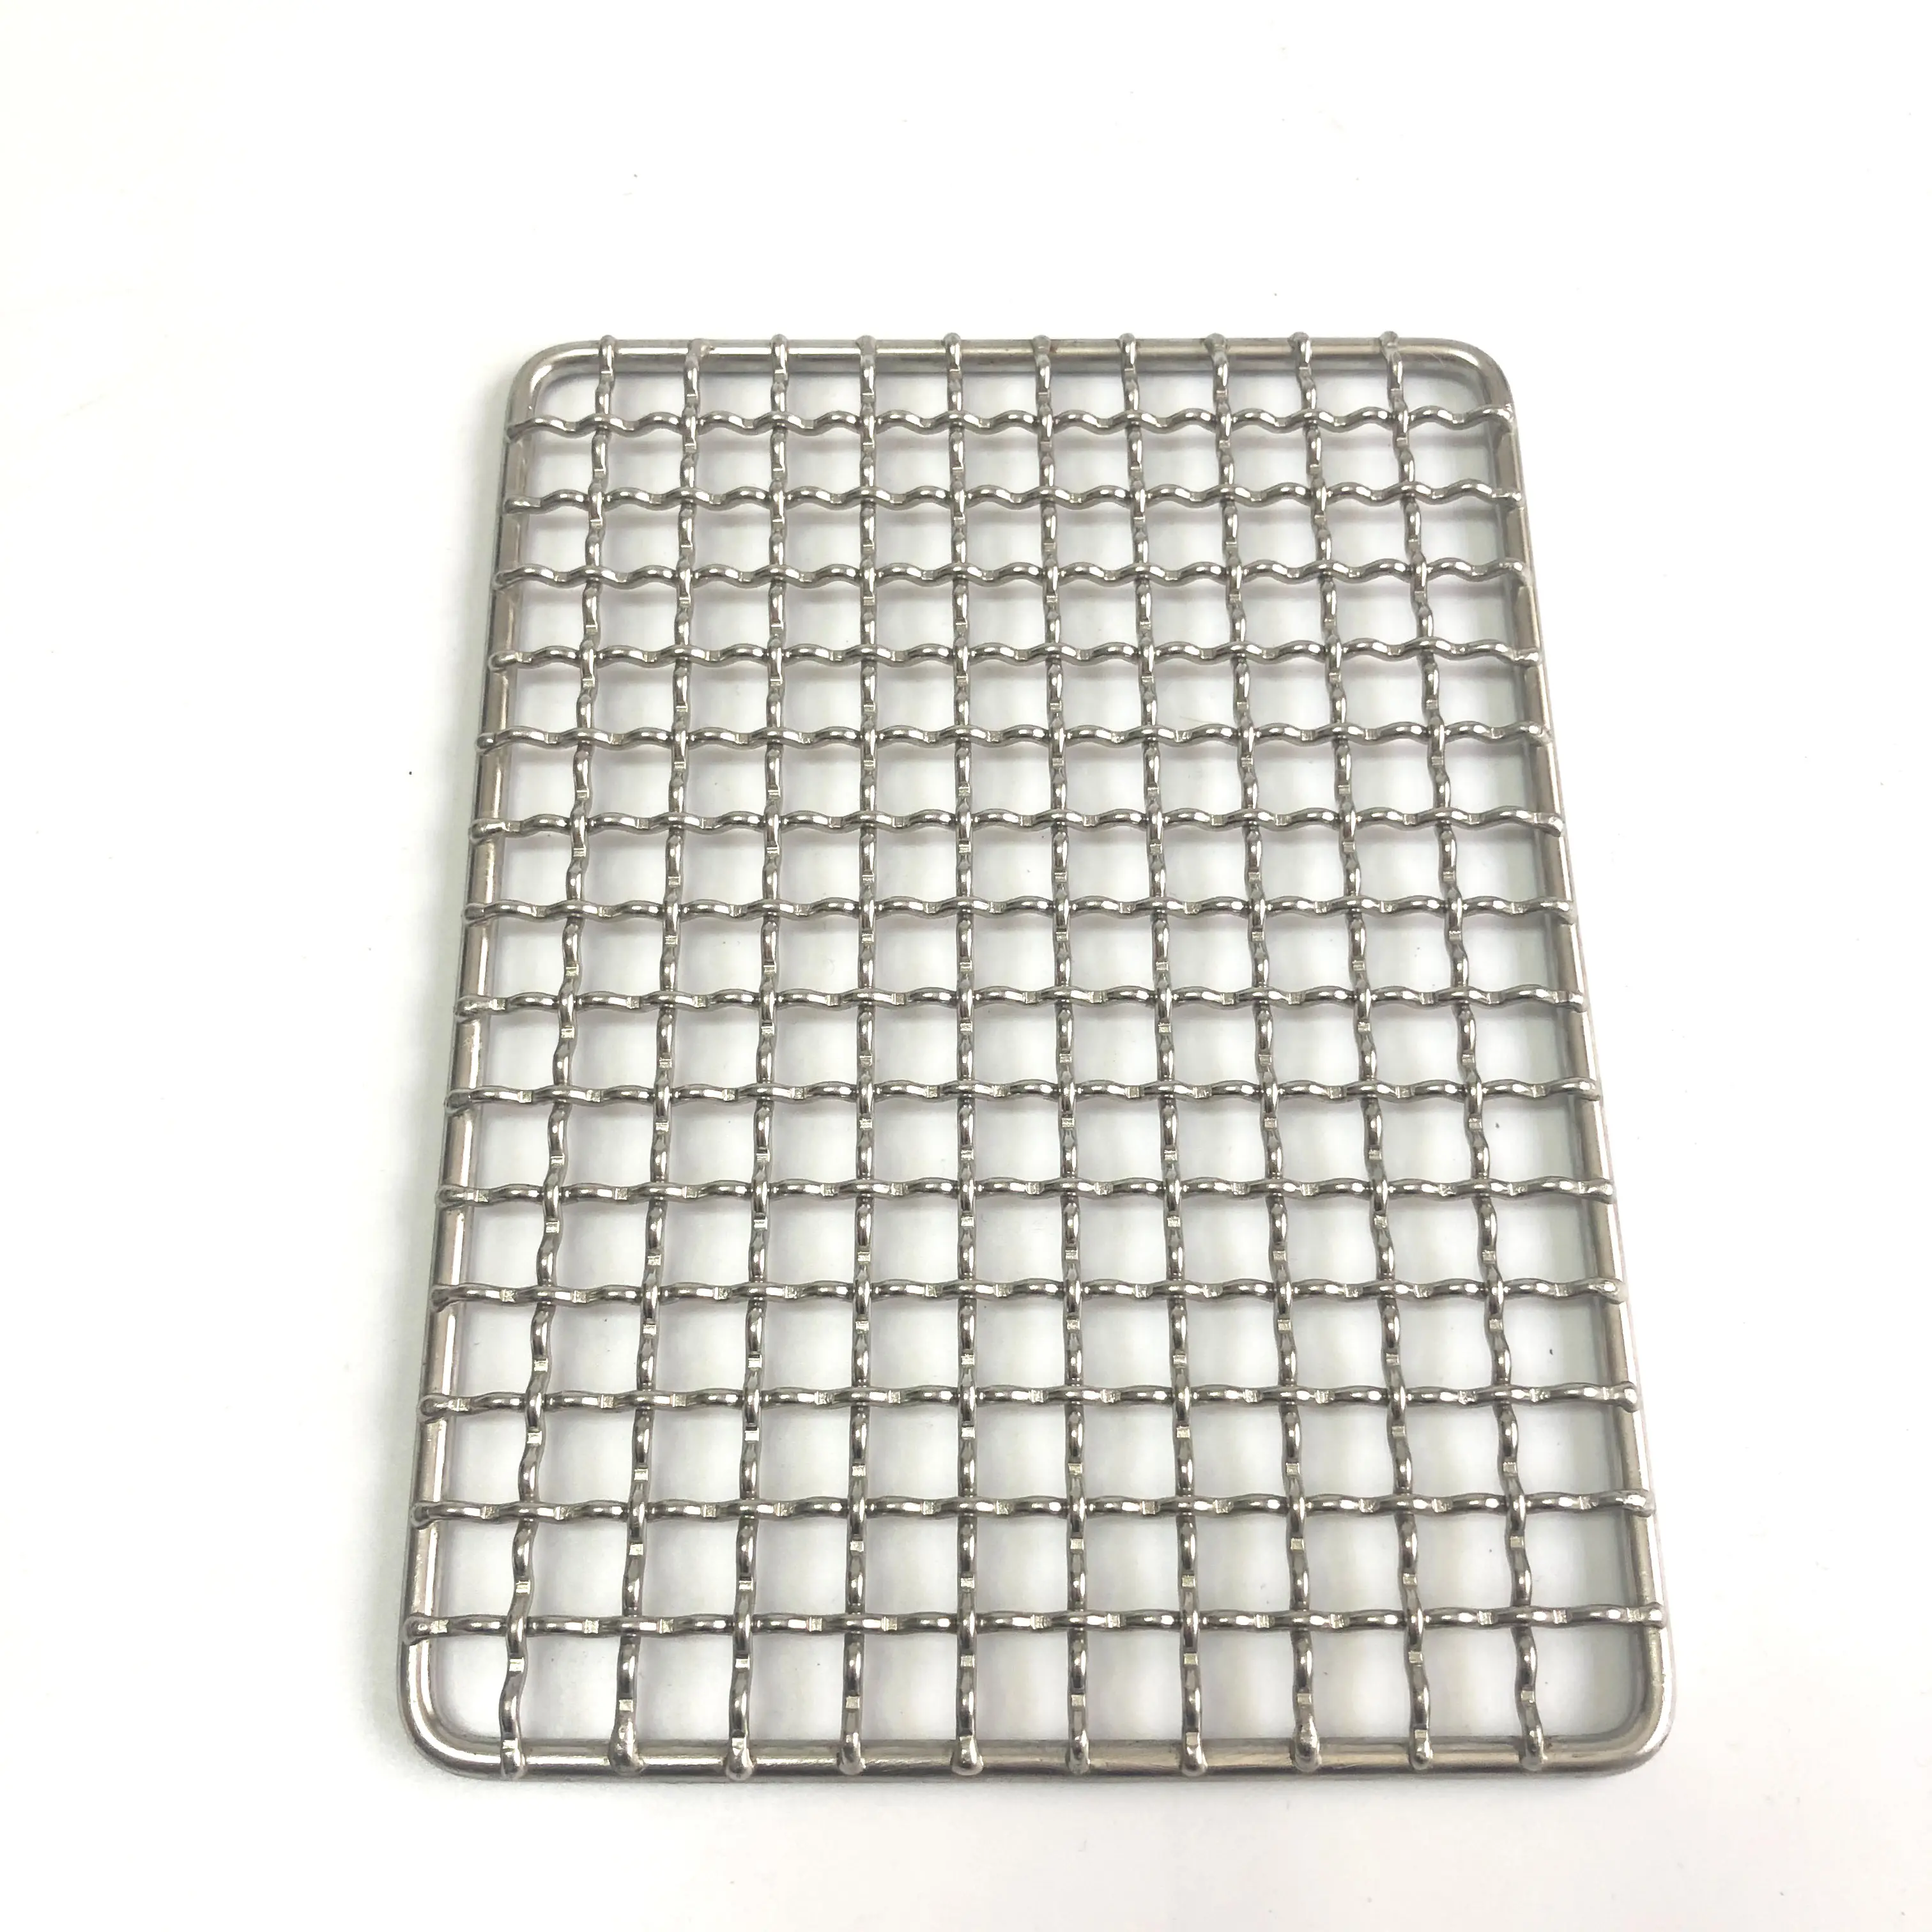 Wire Steaming Barbecue Rack BBQ Grill Mesh Oven Grid Stainless Steel for Home or Restaurant Metal Carton Silver Burner